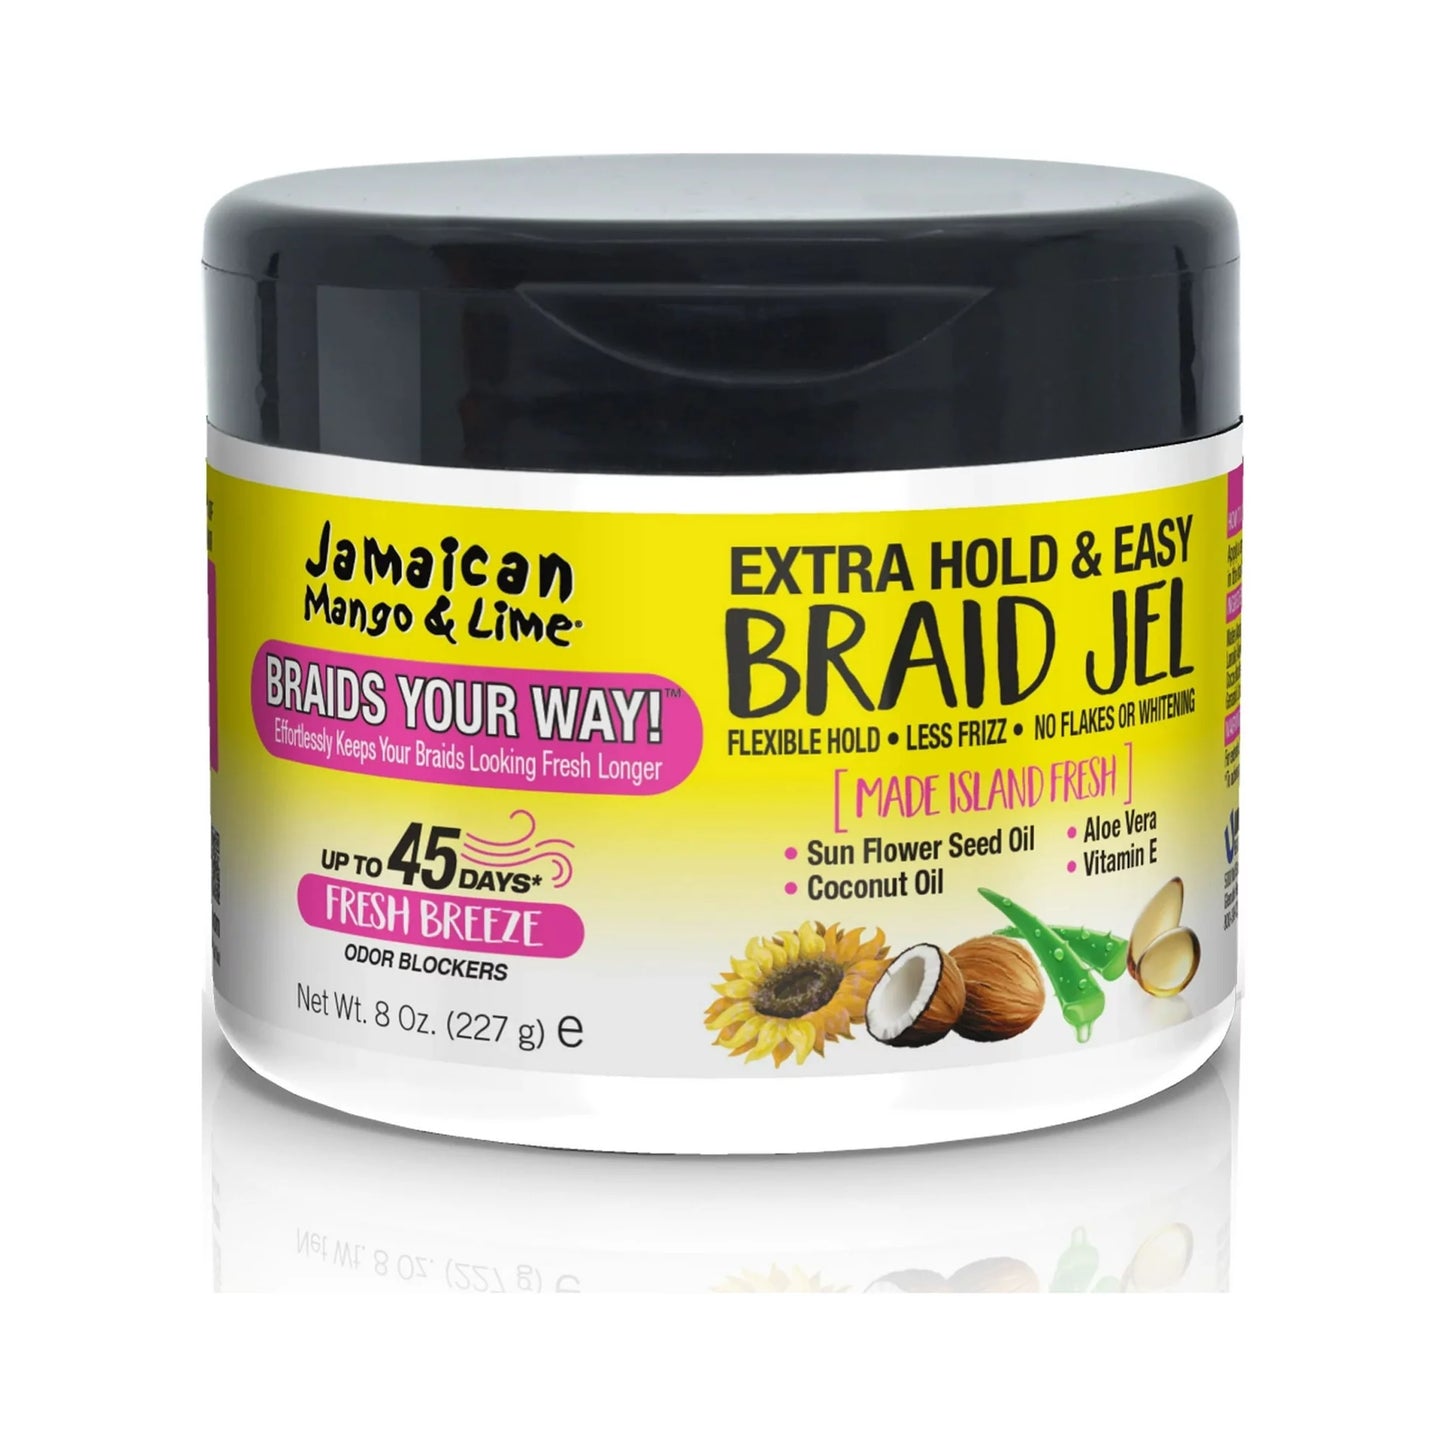 Jamaican Mango & Lime - Braids Your Way Extra Hold & Easy Braid Jel